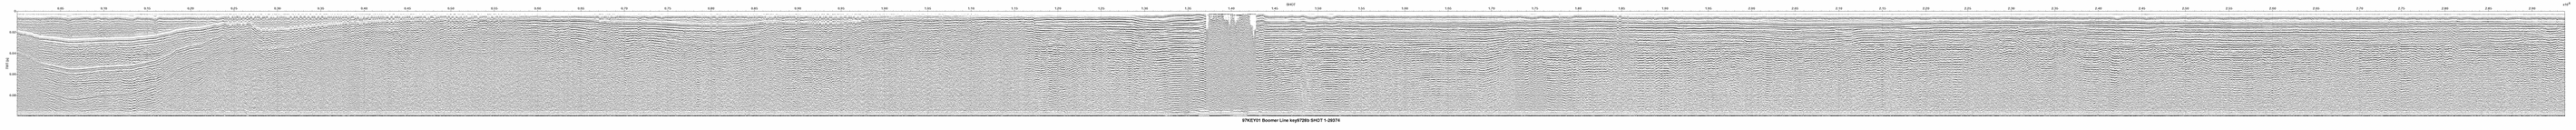 Thumbnail GIF image of the seismic trackline key9728b, with a hotlink to the more detailed, larger JPG image.